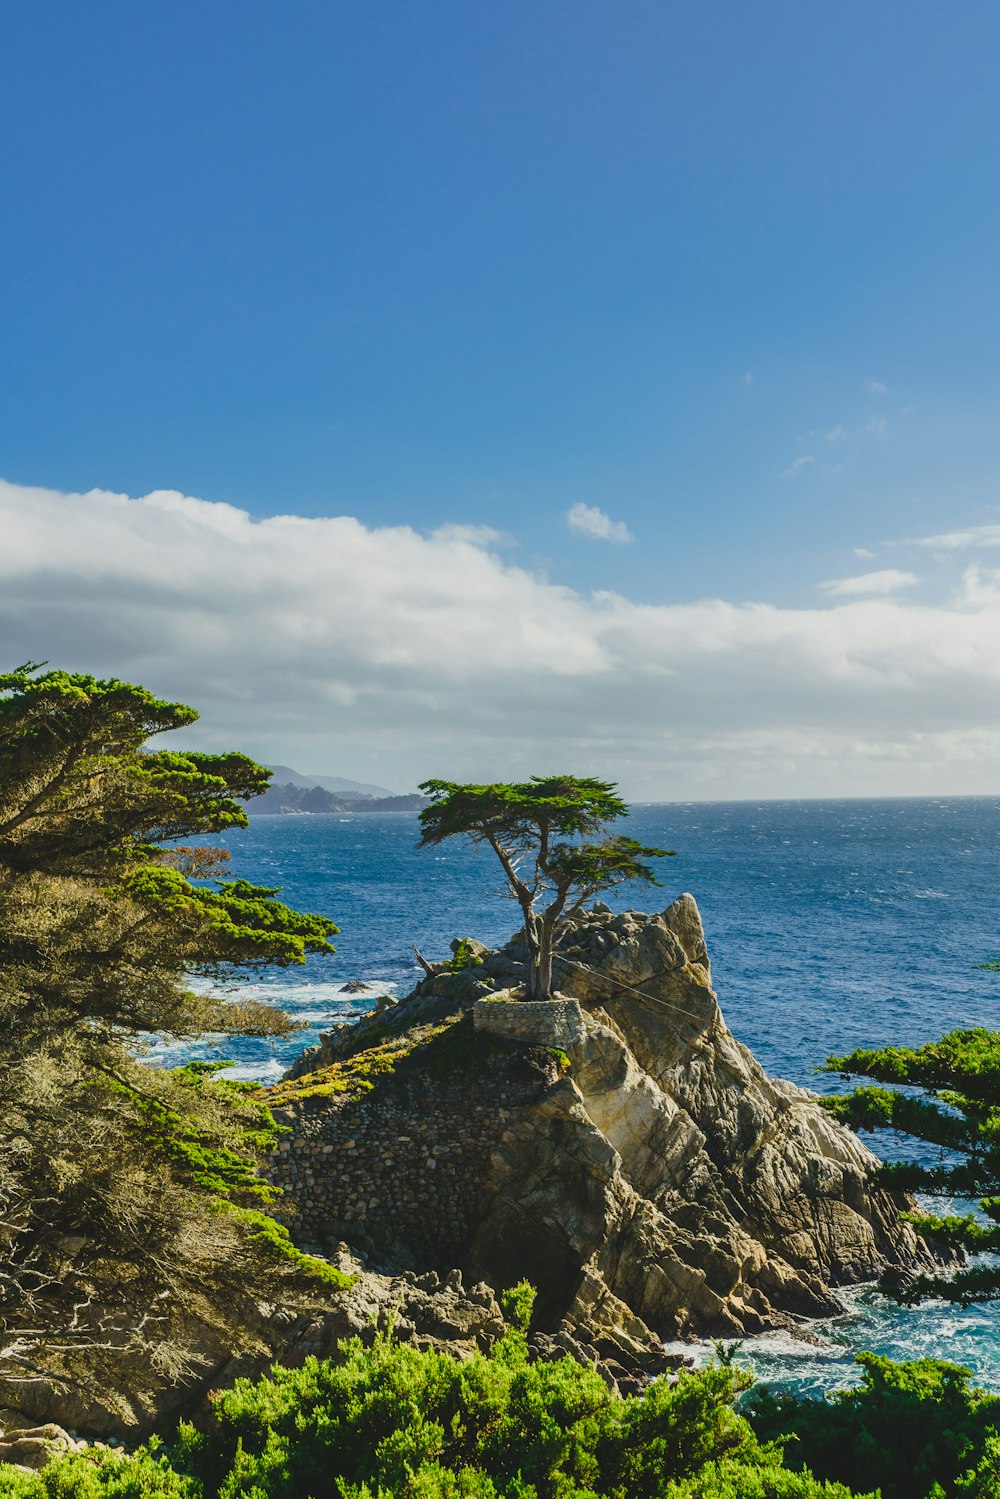 green trees on gray rocky mountain beside blue sea under blue and white cloudy sky during